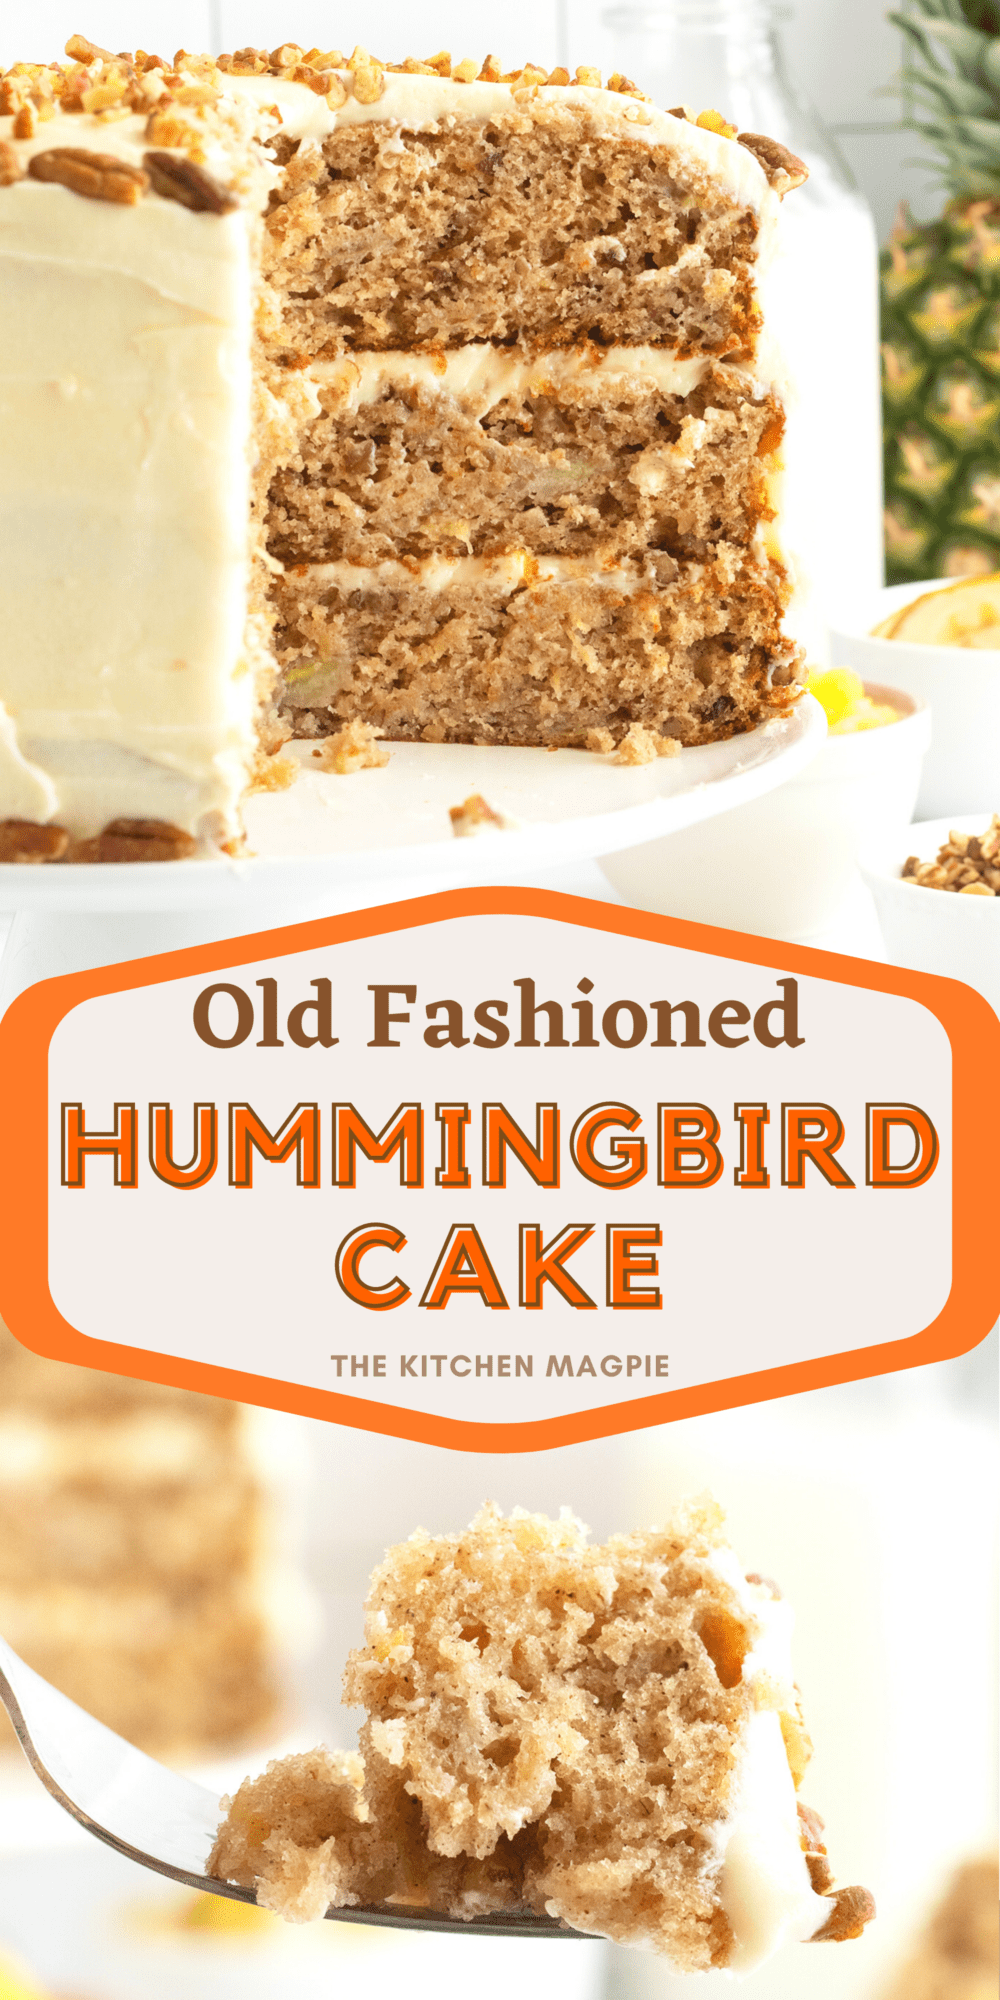 Hummingbird cake is all about plenty of rich, juicy fruits put into a decadent and moist cake and topped with some great cream cheese icing.